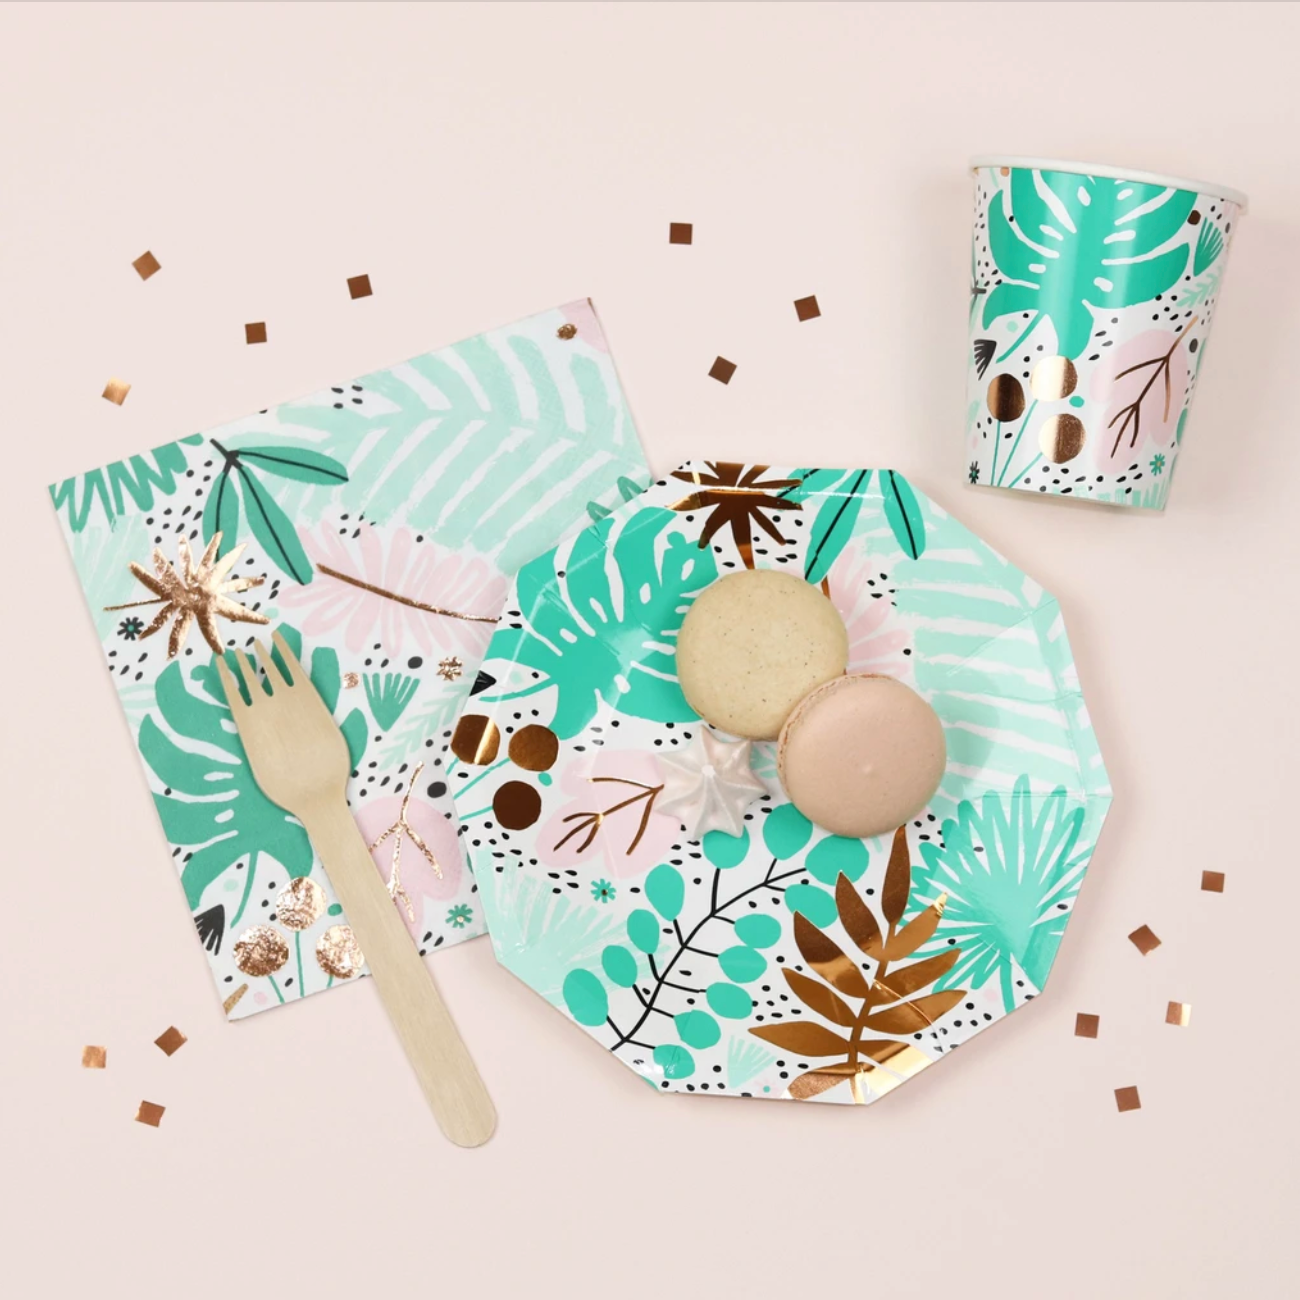 Tropicale Small Plates - Ralph and Luna Party Shop